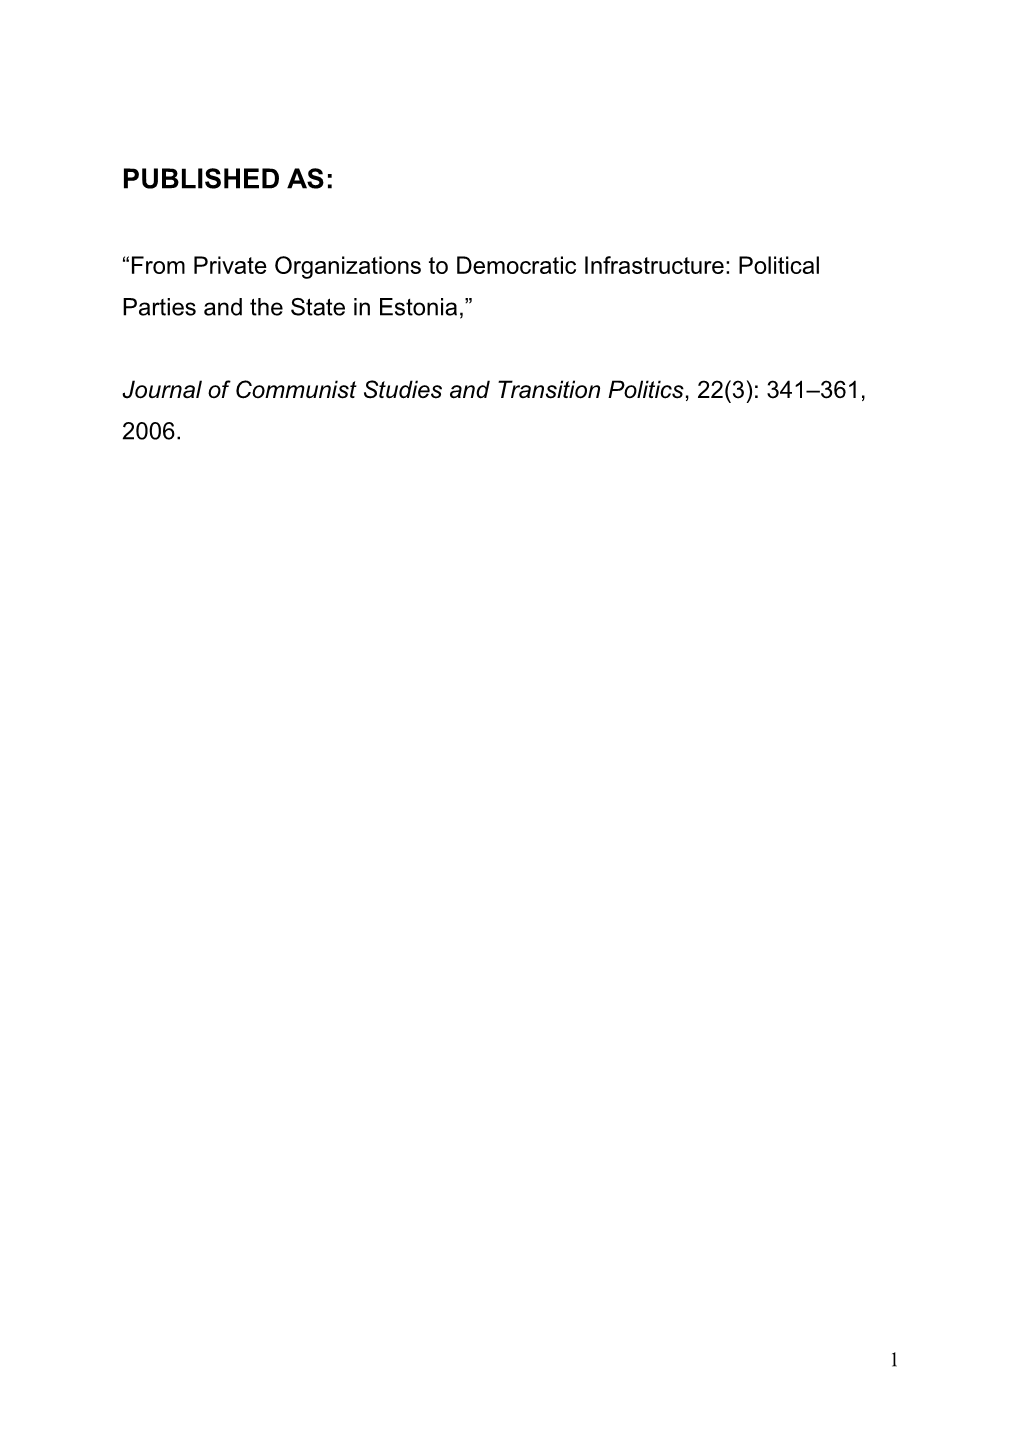 Political Parties and the State in Estonia,”